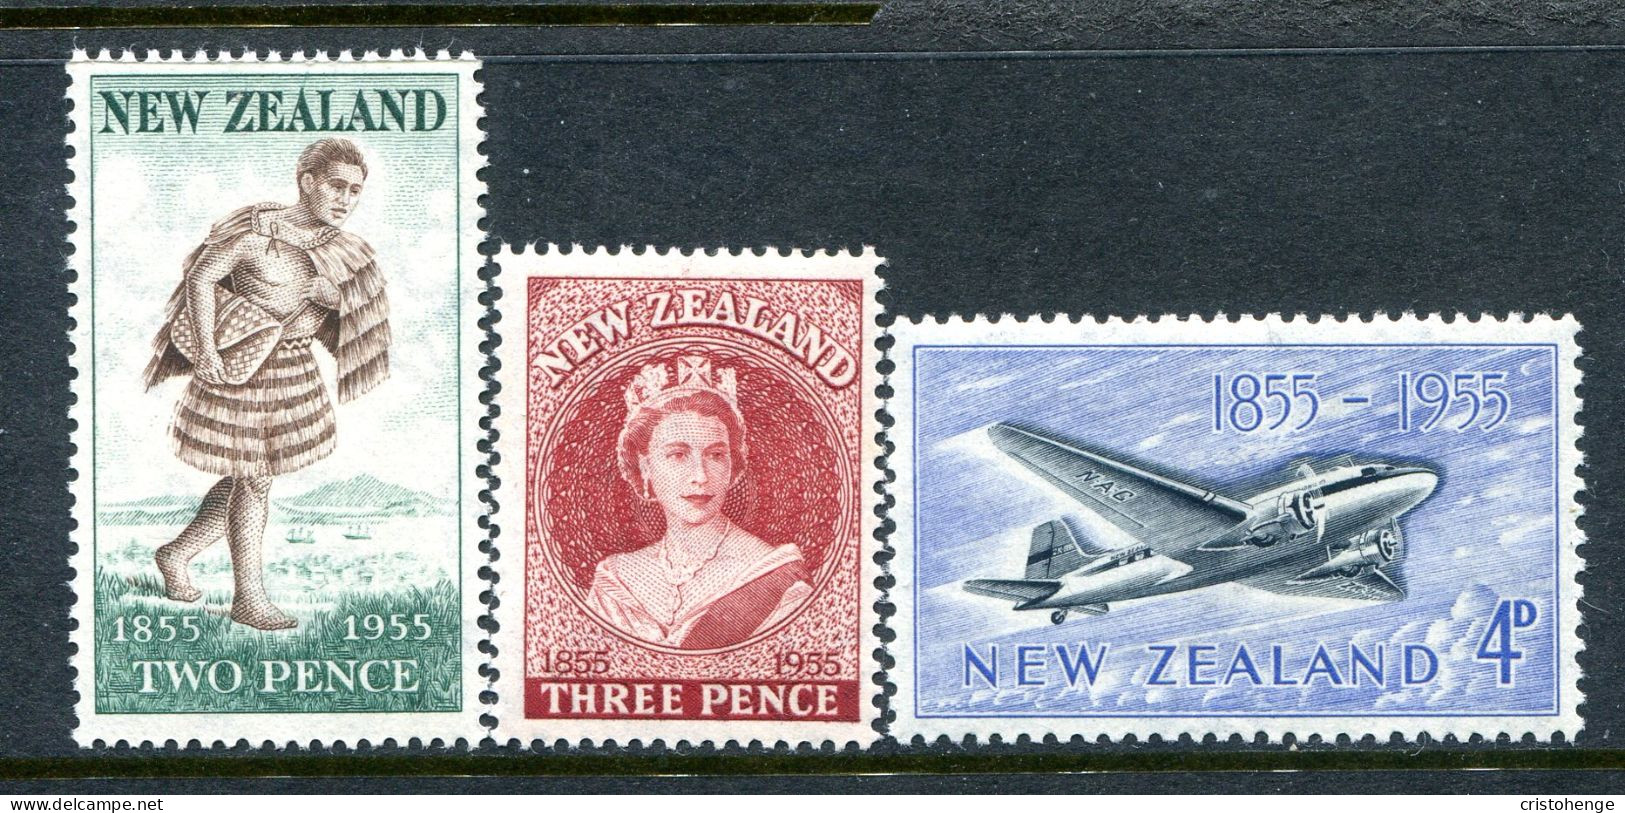 New Zealand 1955 Centenary Of First New Zealand Postage Stamps Set HM (SG 739-741) - Ungebraucht